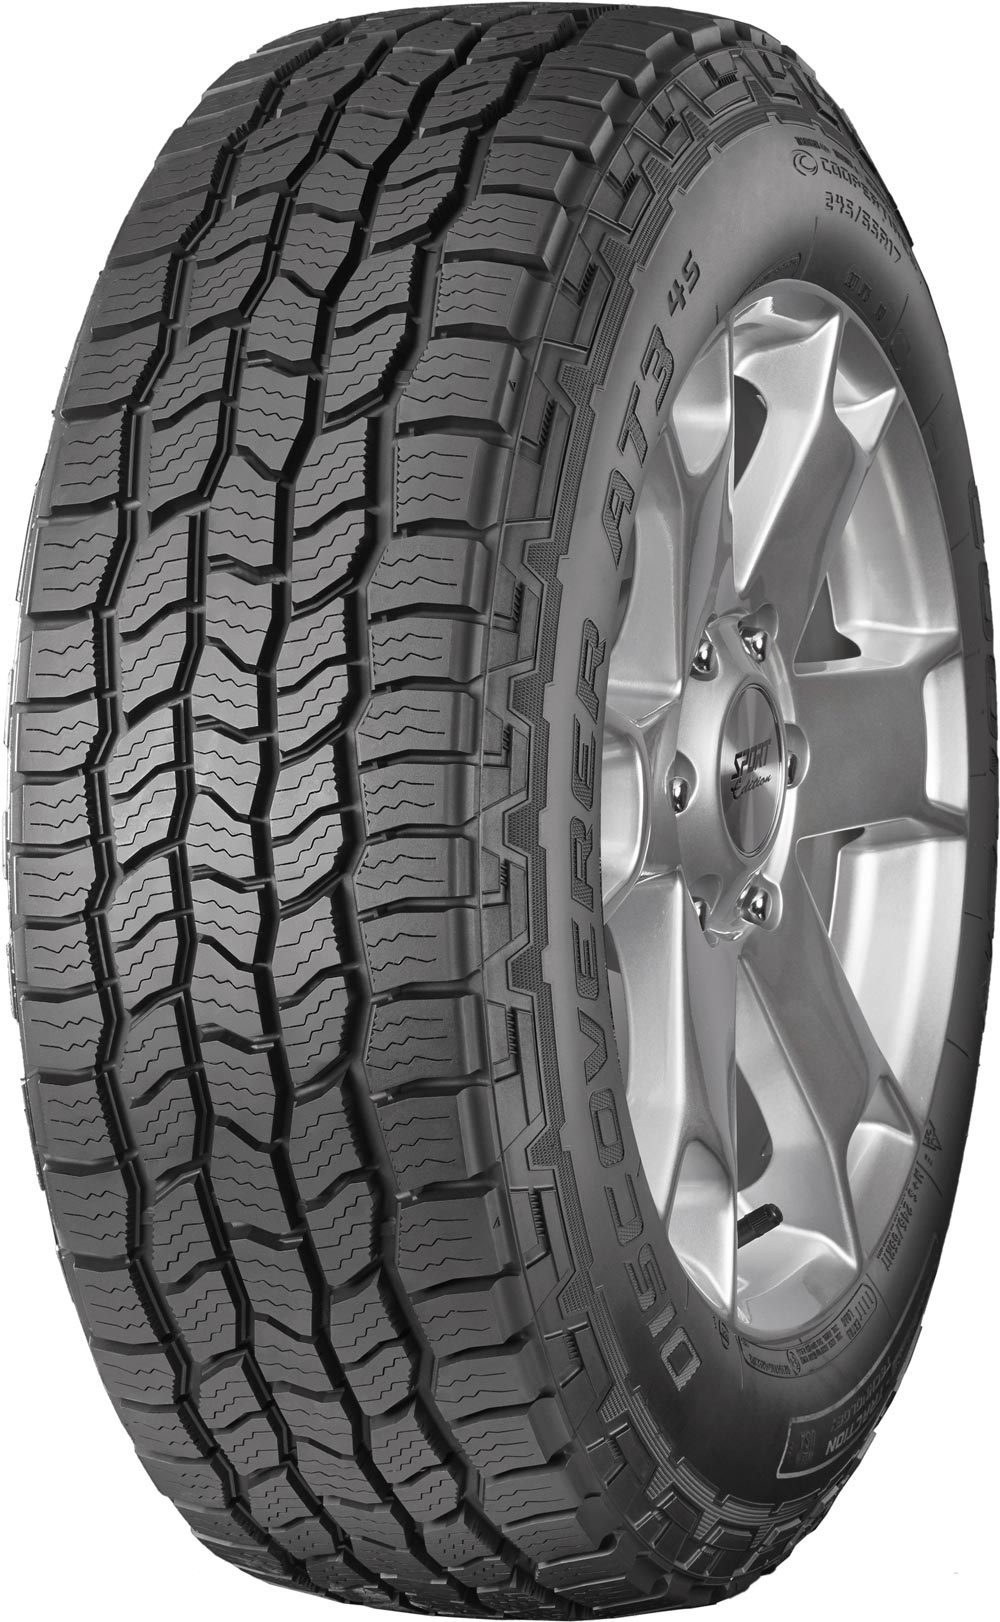 Джипови гуми COOPER DISCOVERER AT3 4S 255/70 R17 112T